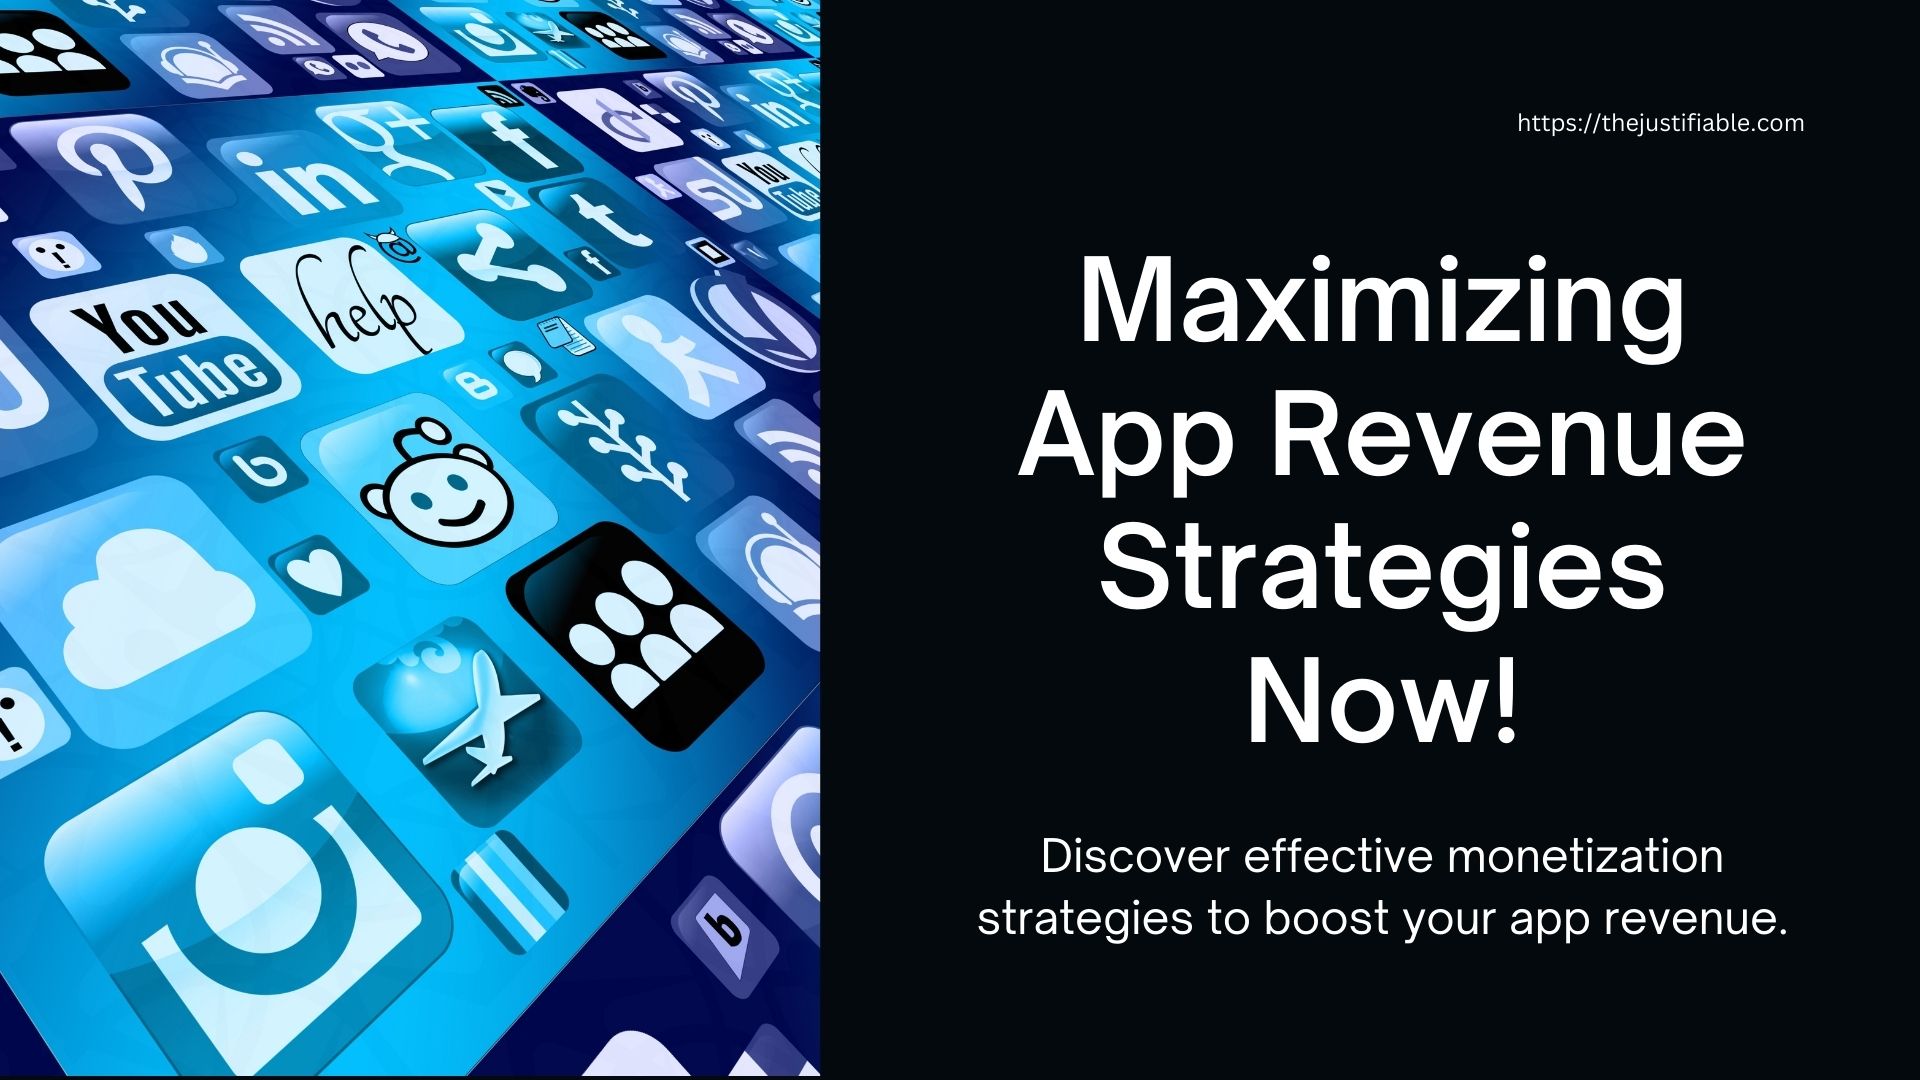 The image is a graphic related to app monetization strategies.